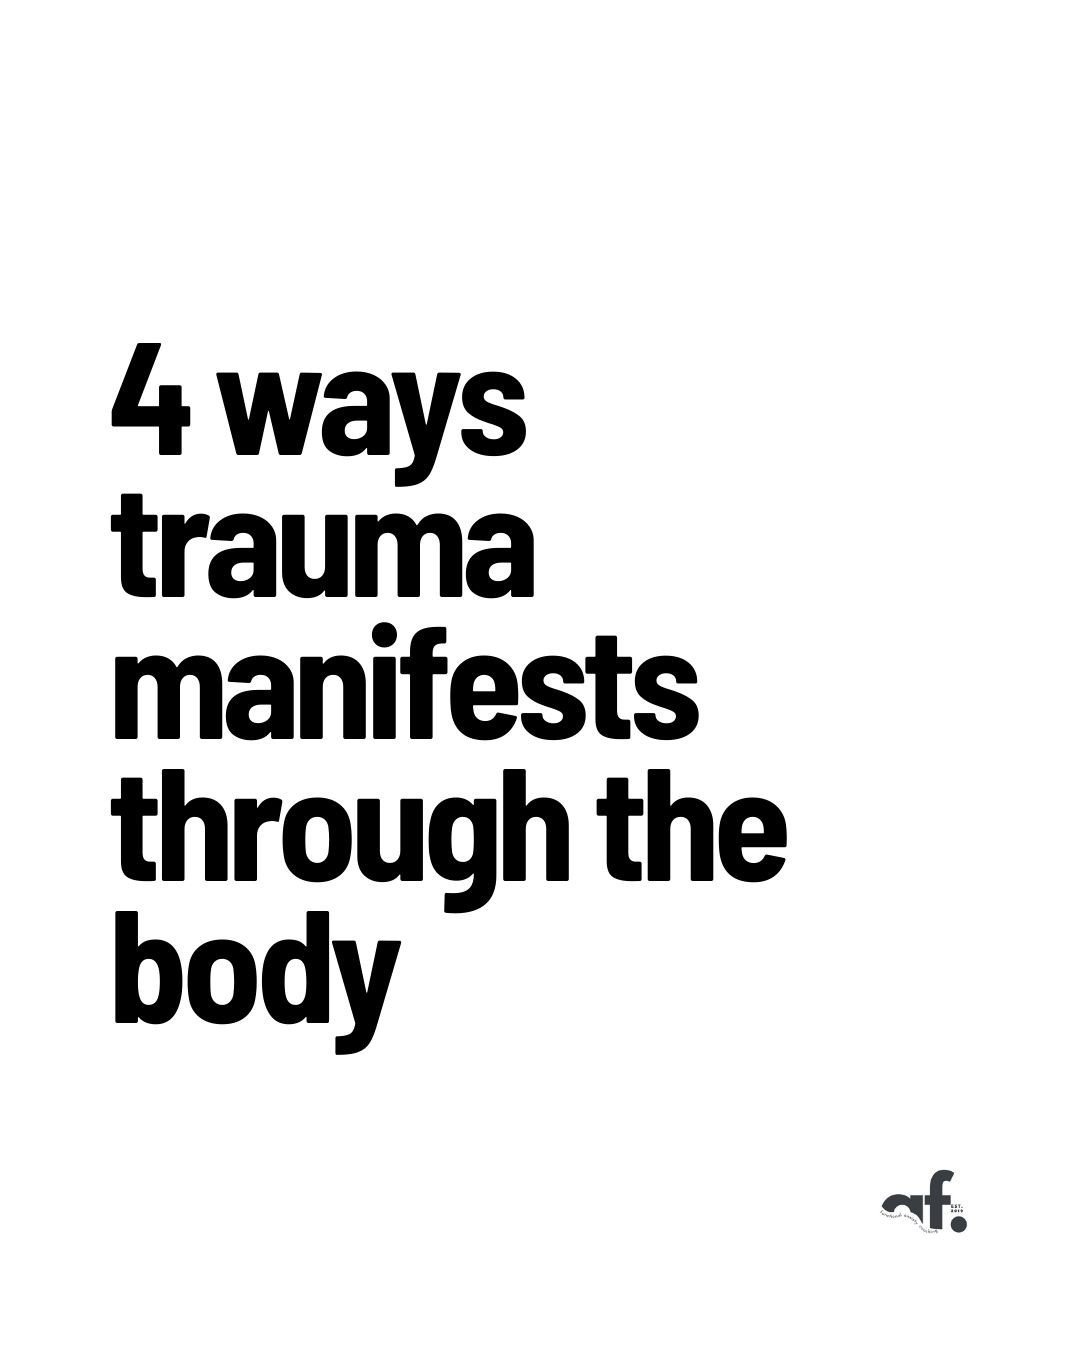 Trauma isn't only a person's emotional and psychological reaction to an intense or overwhelming event; it can be felt physically too. ⁠
⁠
Your survival response is a complex reaction that involves several brain regions and chemicals. ⁠
⁠
It's trigger